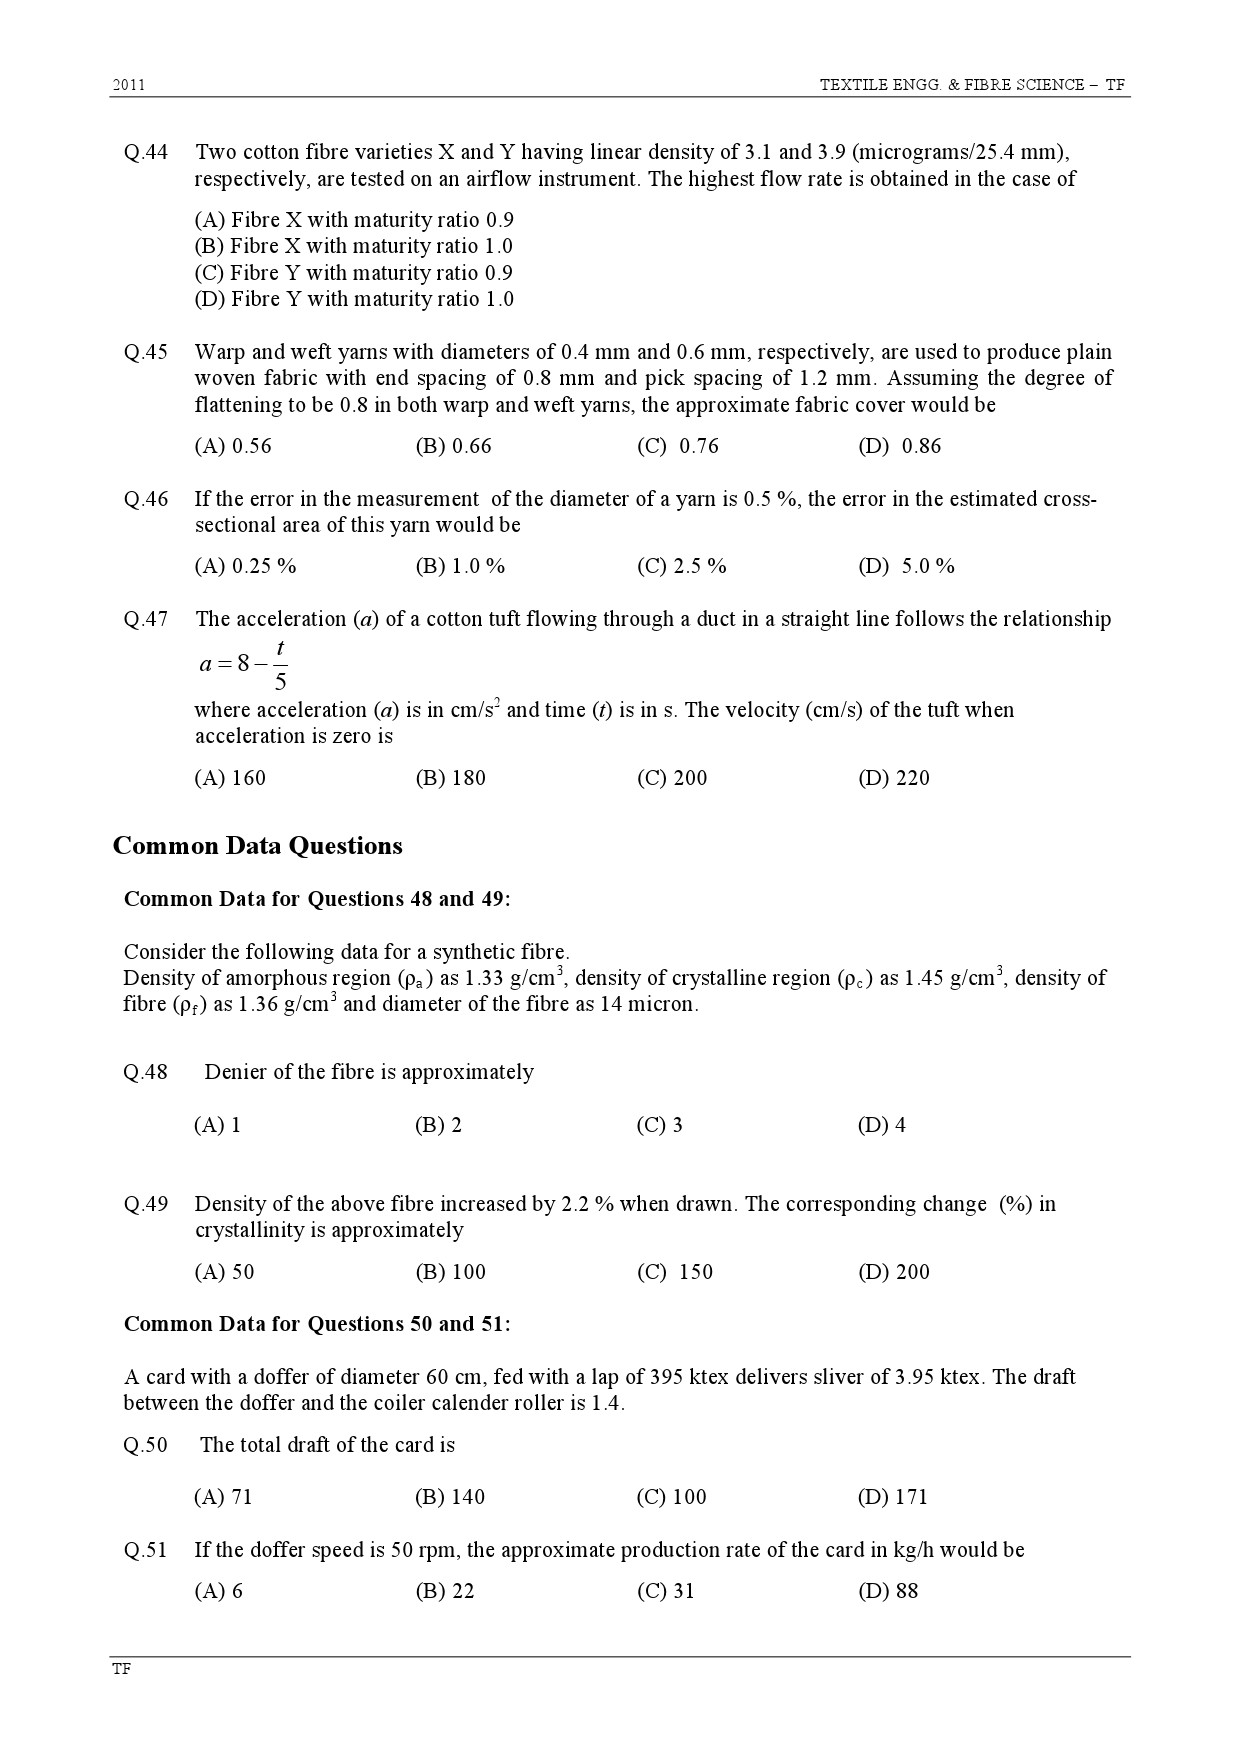 GATE Exam Question Paper 2011 Textile Engineering and Fibre Science 8